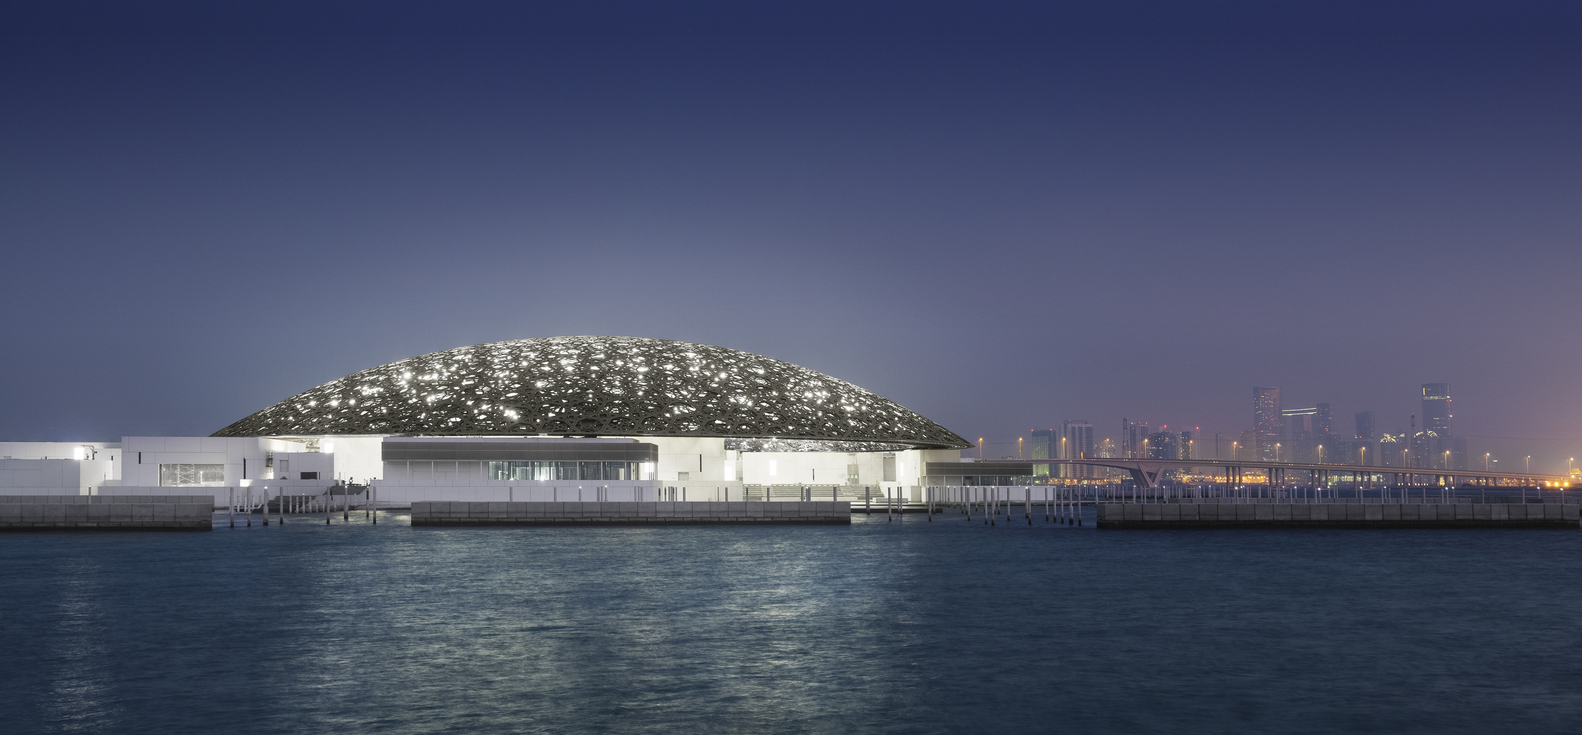 Exterior night view of the Louvre Abu Dhabi